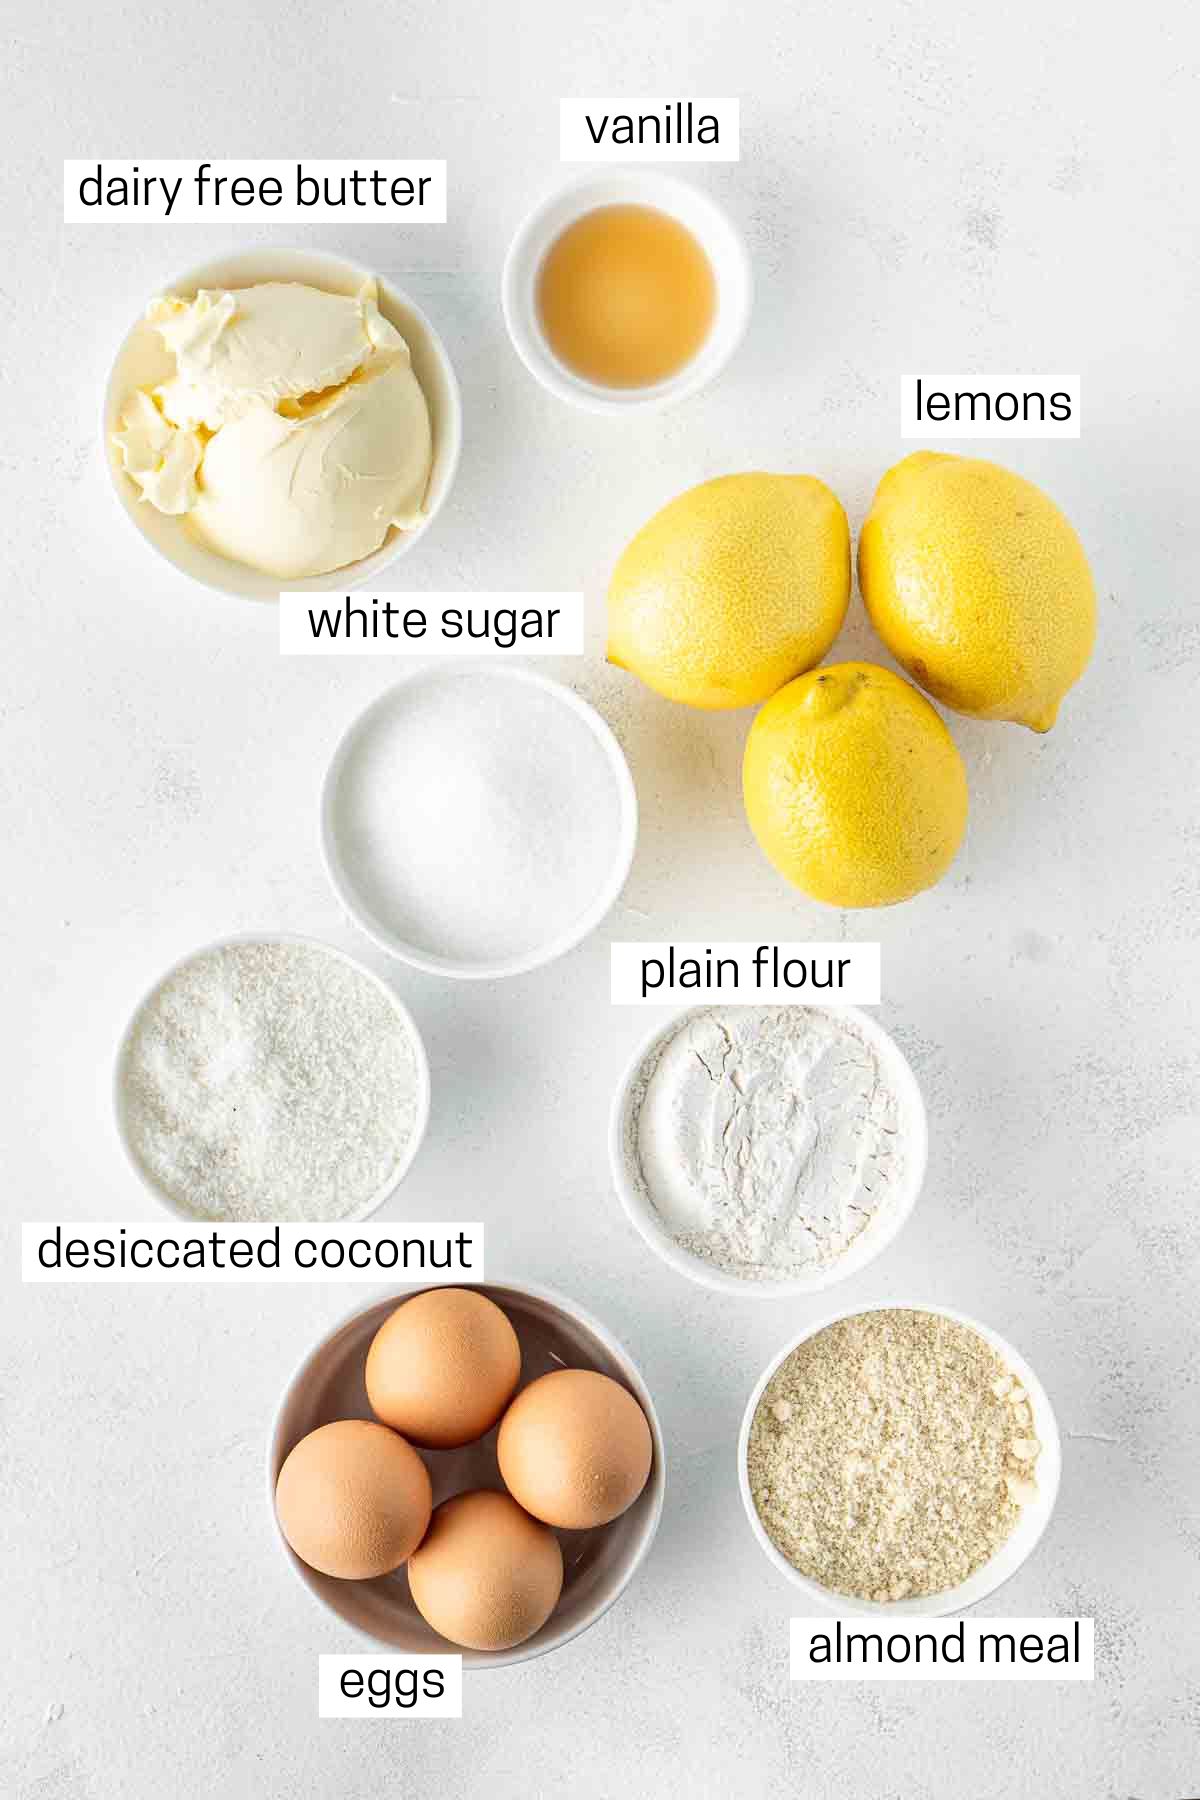 All ingredients needed for dairy free lemon bars.